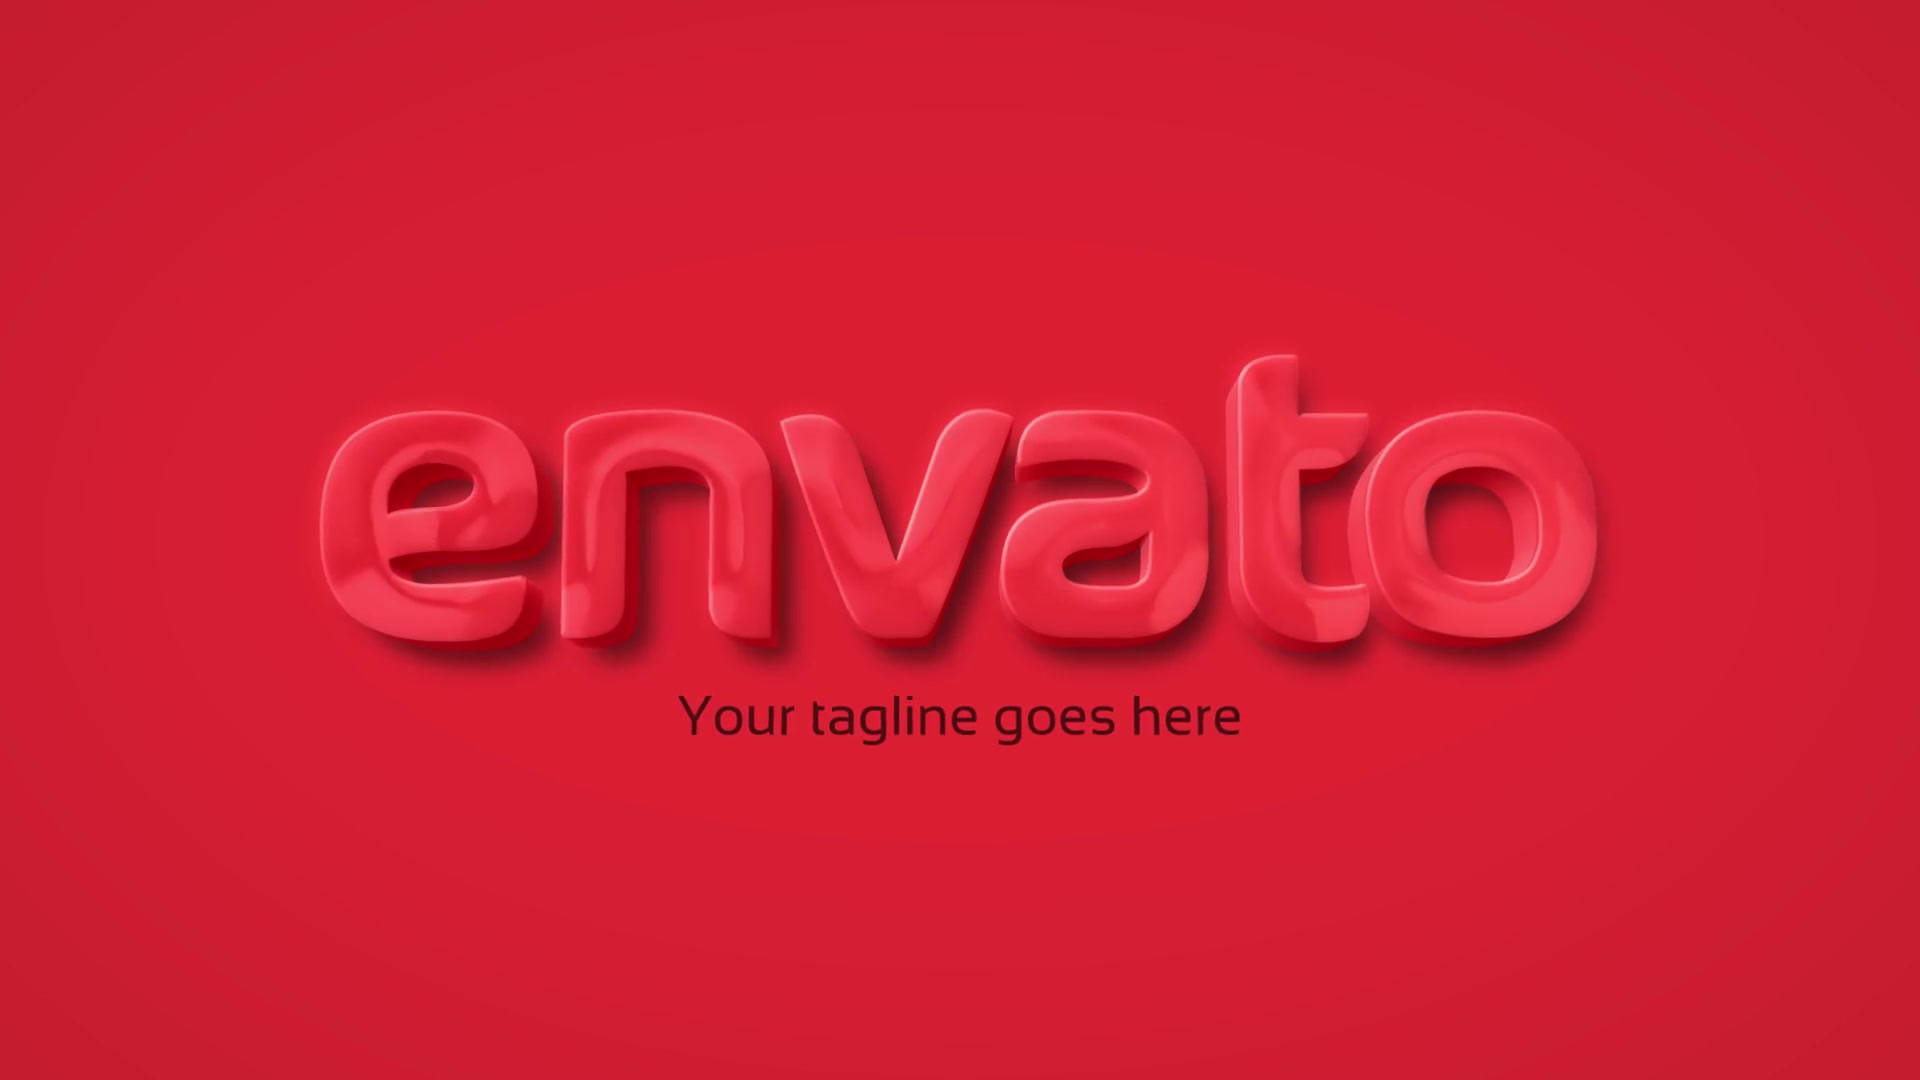 Strong & Clean Corporate 3D Embossed Logo - Download Videohive 15401188